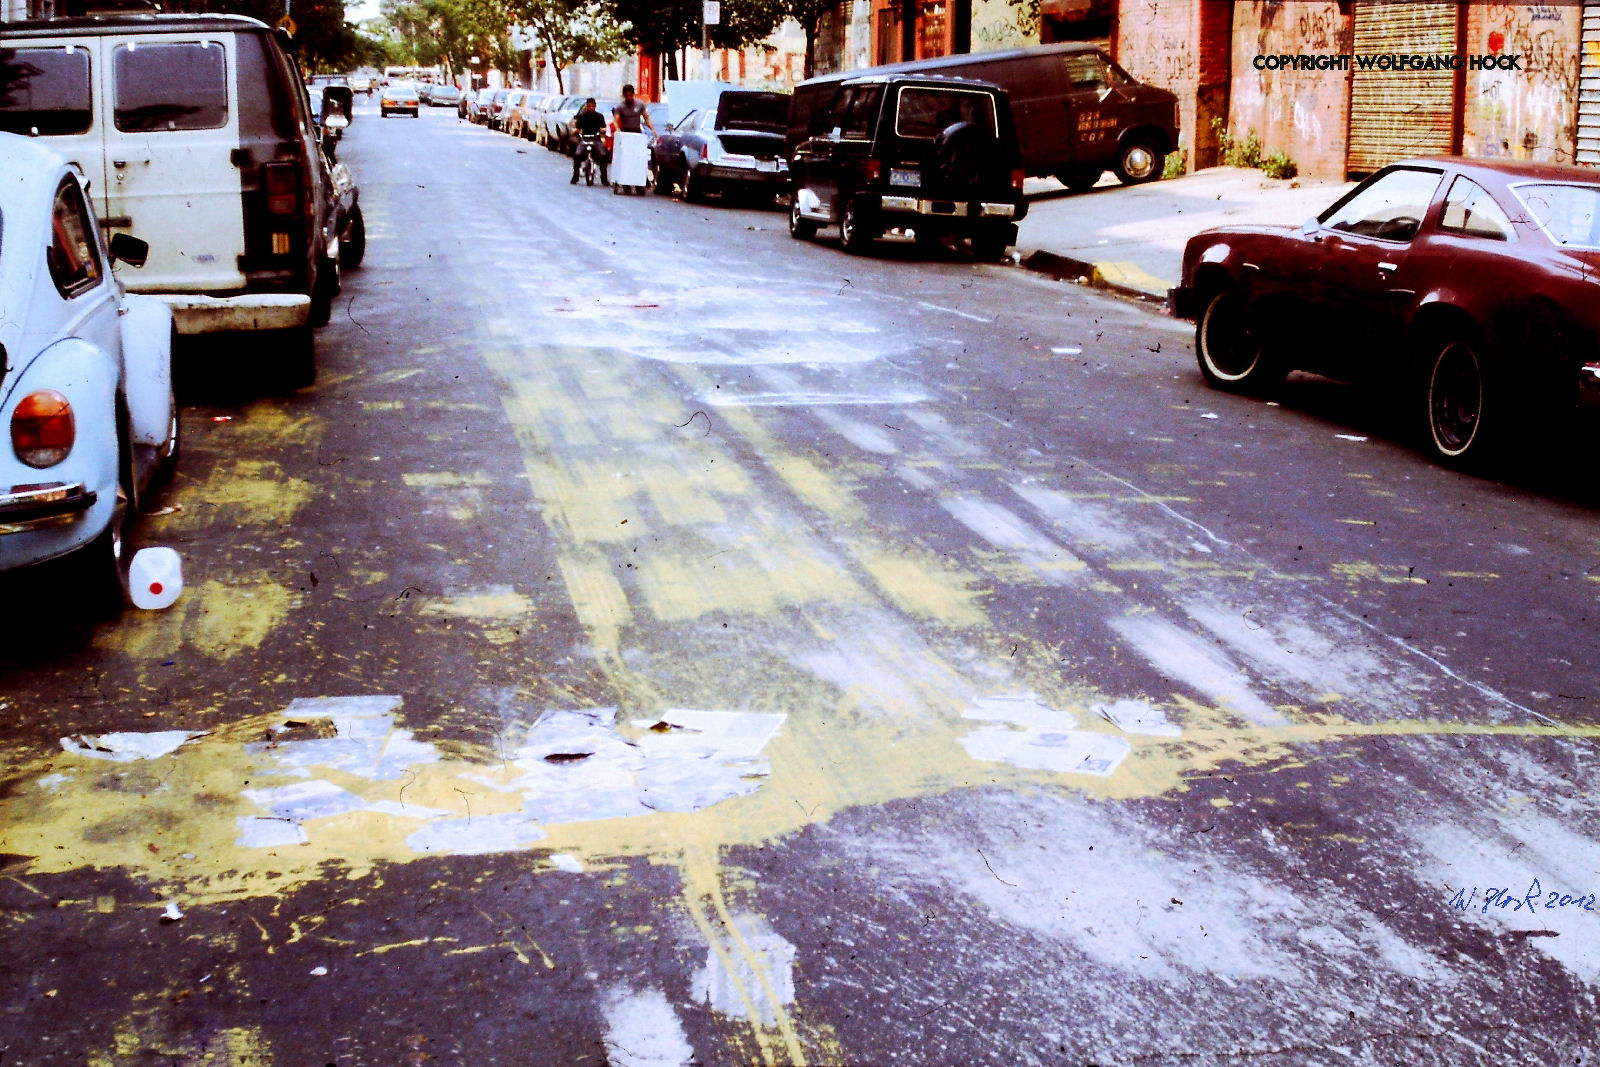 Paint street 2012   Inkjet printed photographic mixed media on paper, 67 x 45 cm